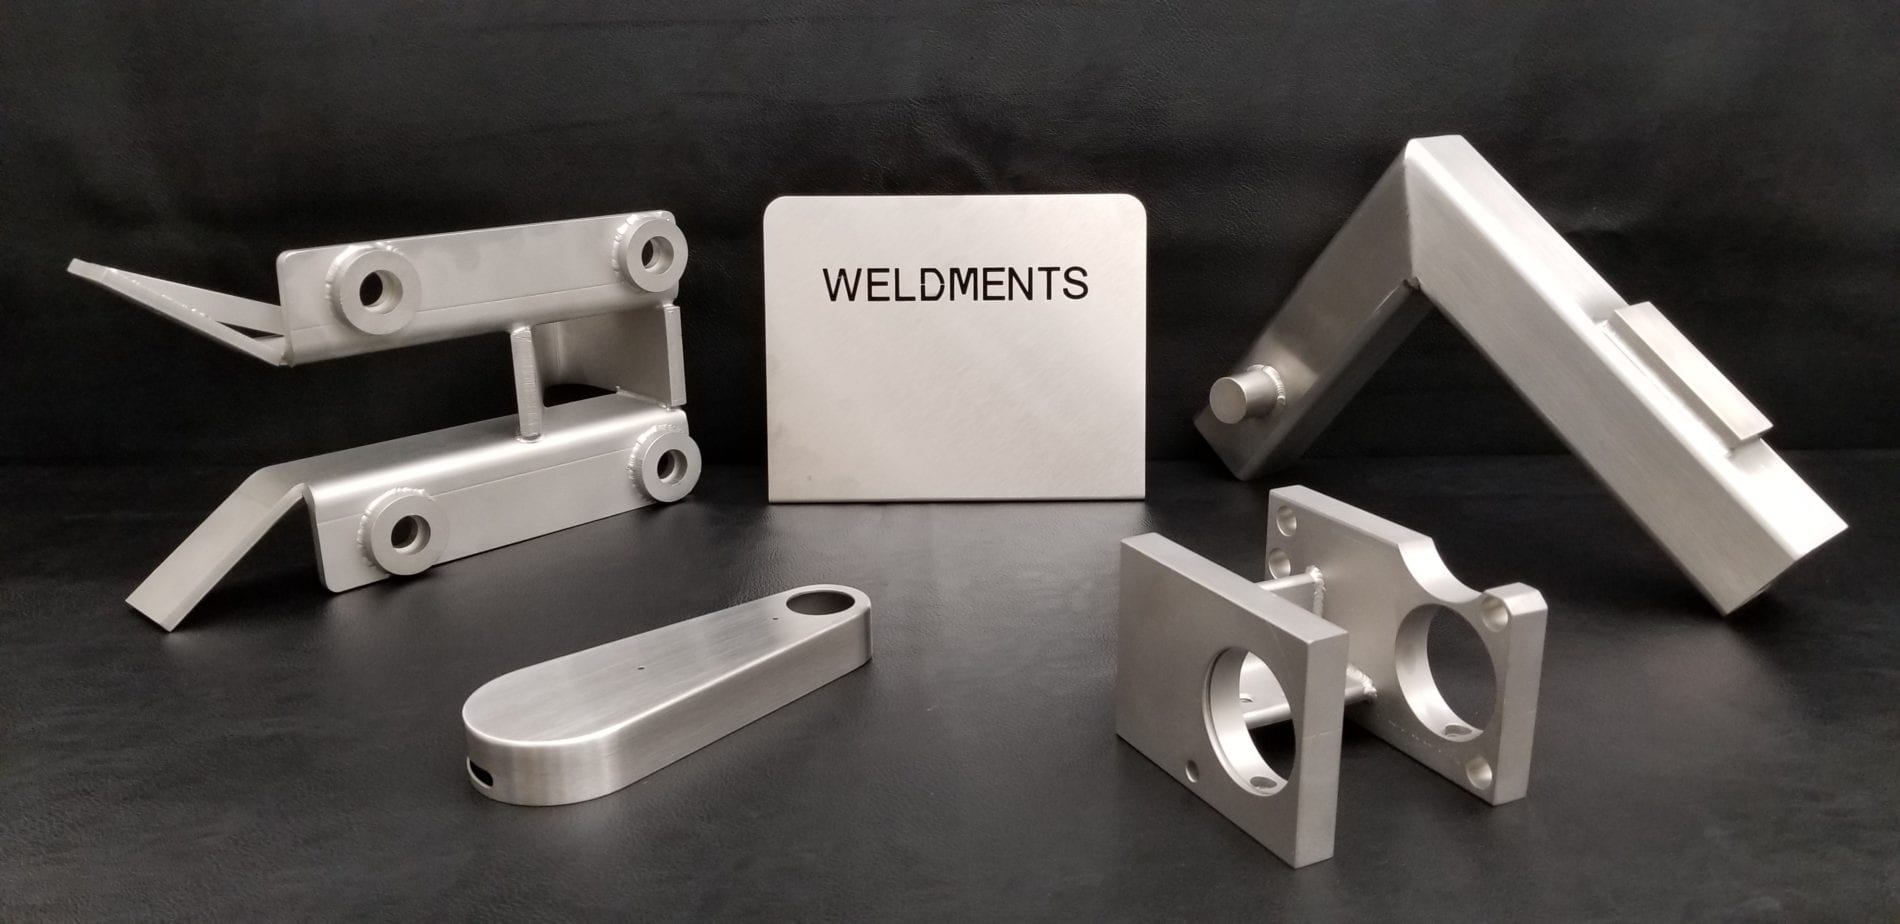 Precision Weldments and Welding in Ohio